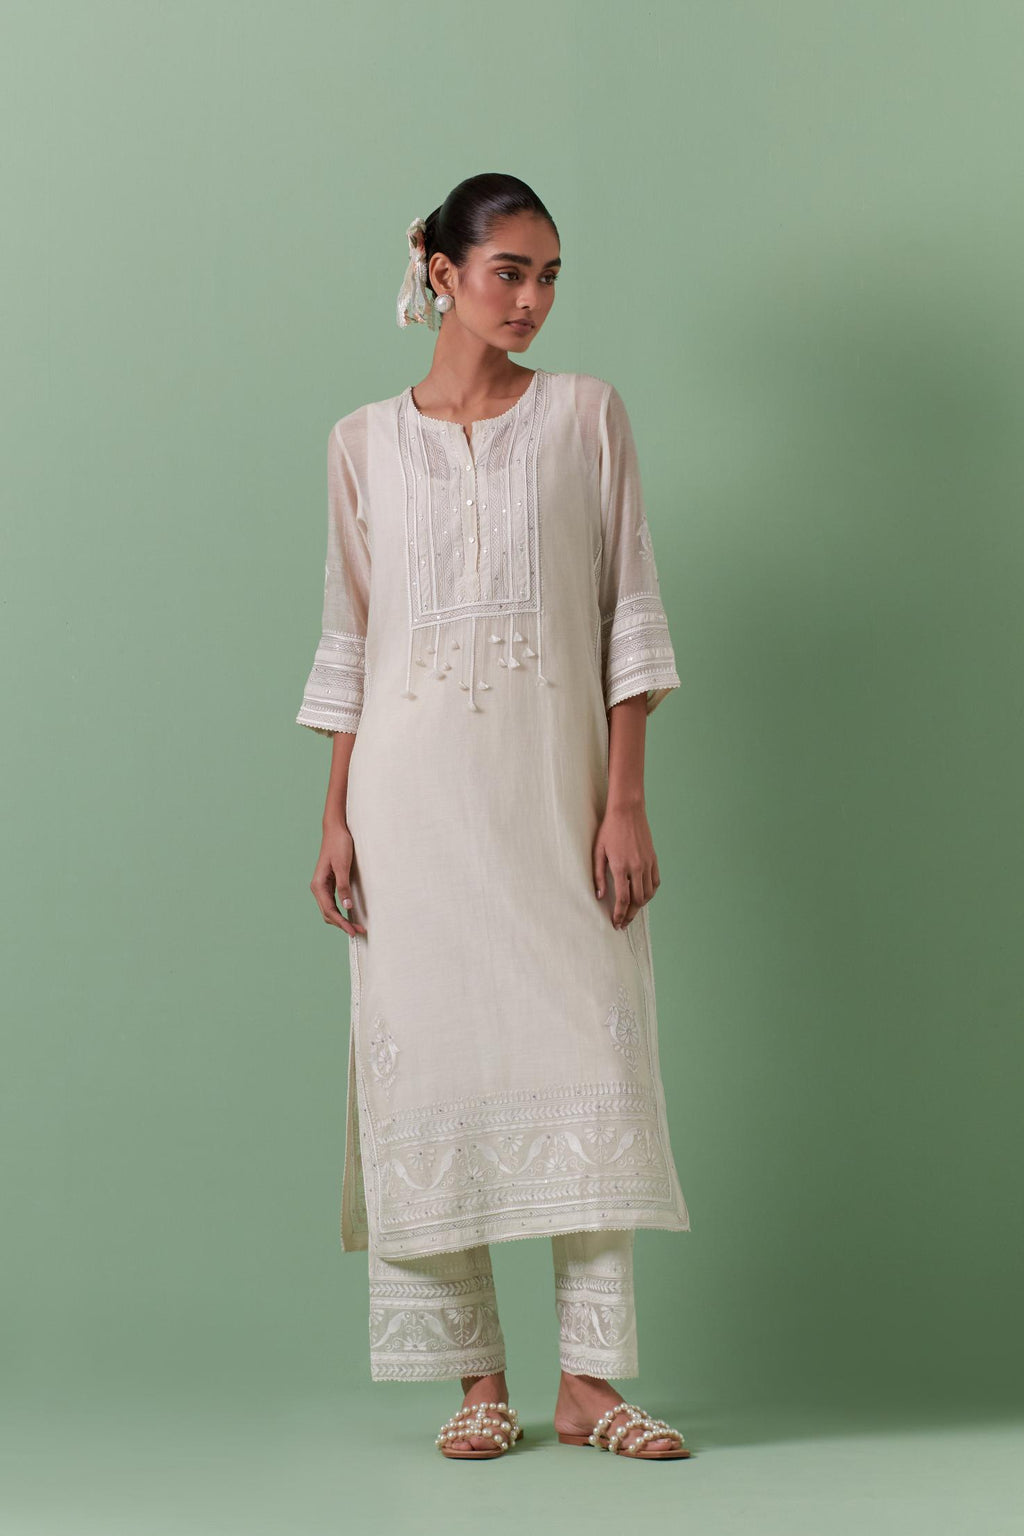 Off-white cotton chanderi straight kurta set with yoke with patchwork and silk thread embroidery highlighted with mirror, sequins, tassels and braids.